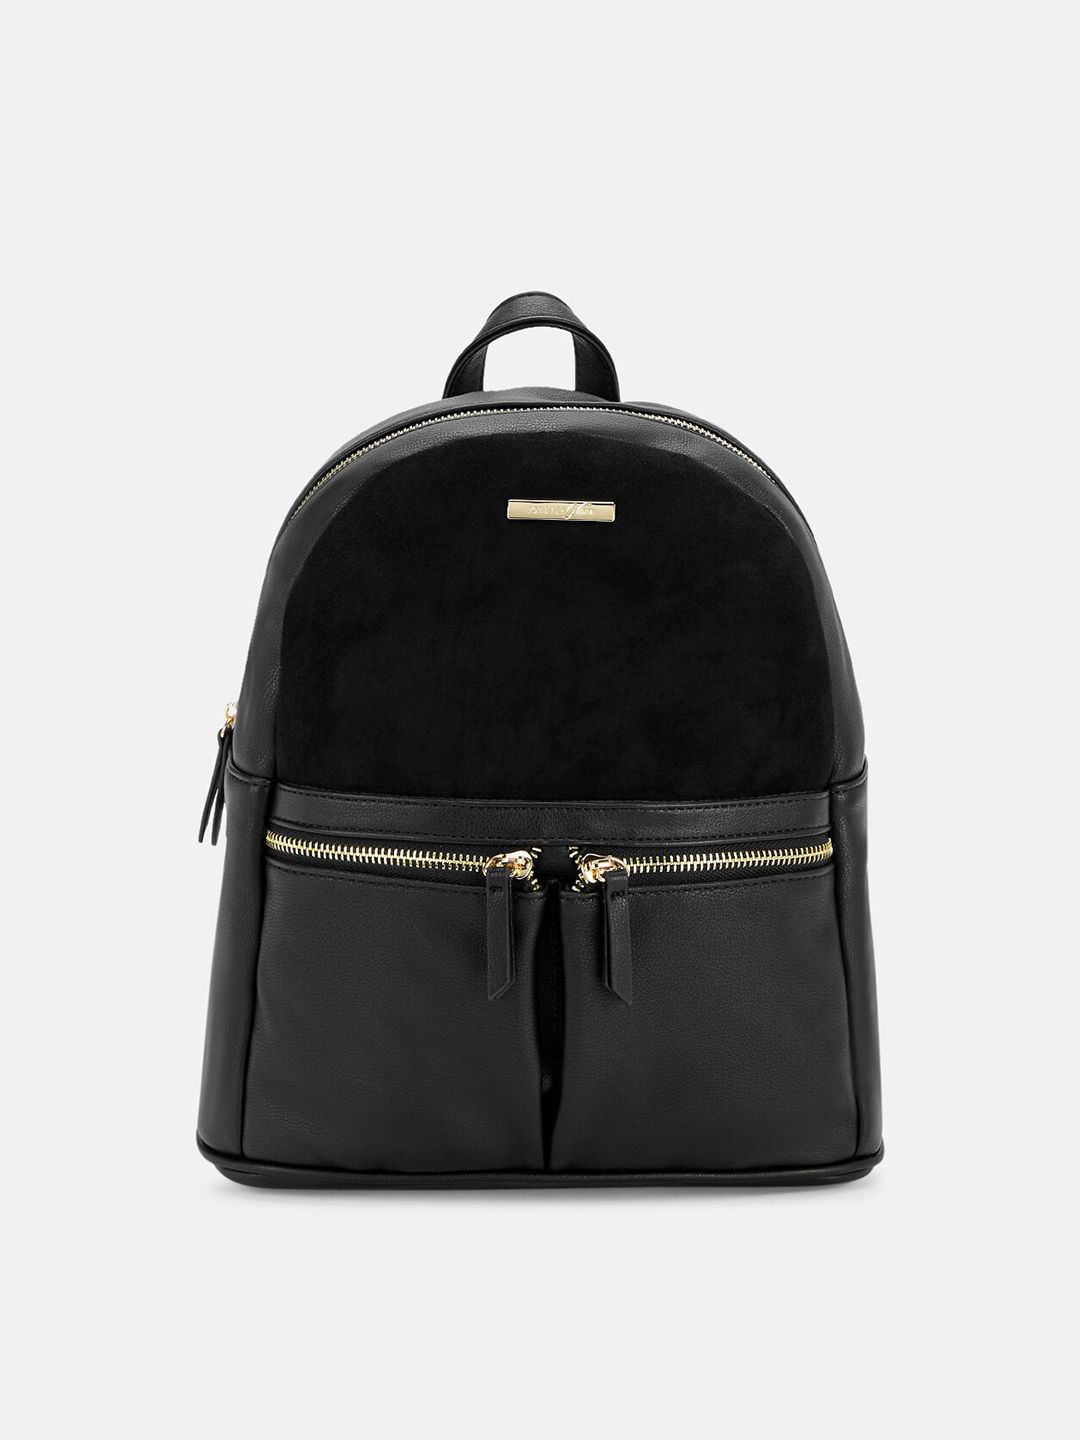 Forever Glam by Pantaloons Women Black & Gold-Toned Backpack Price in India